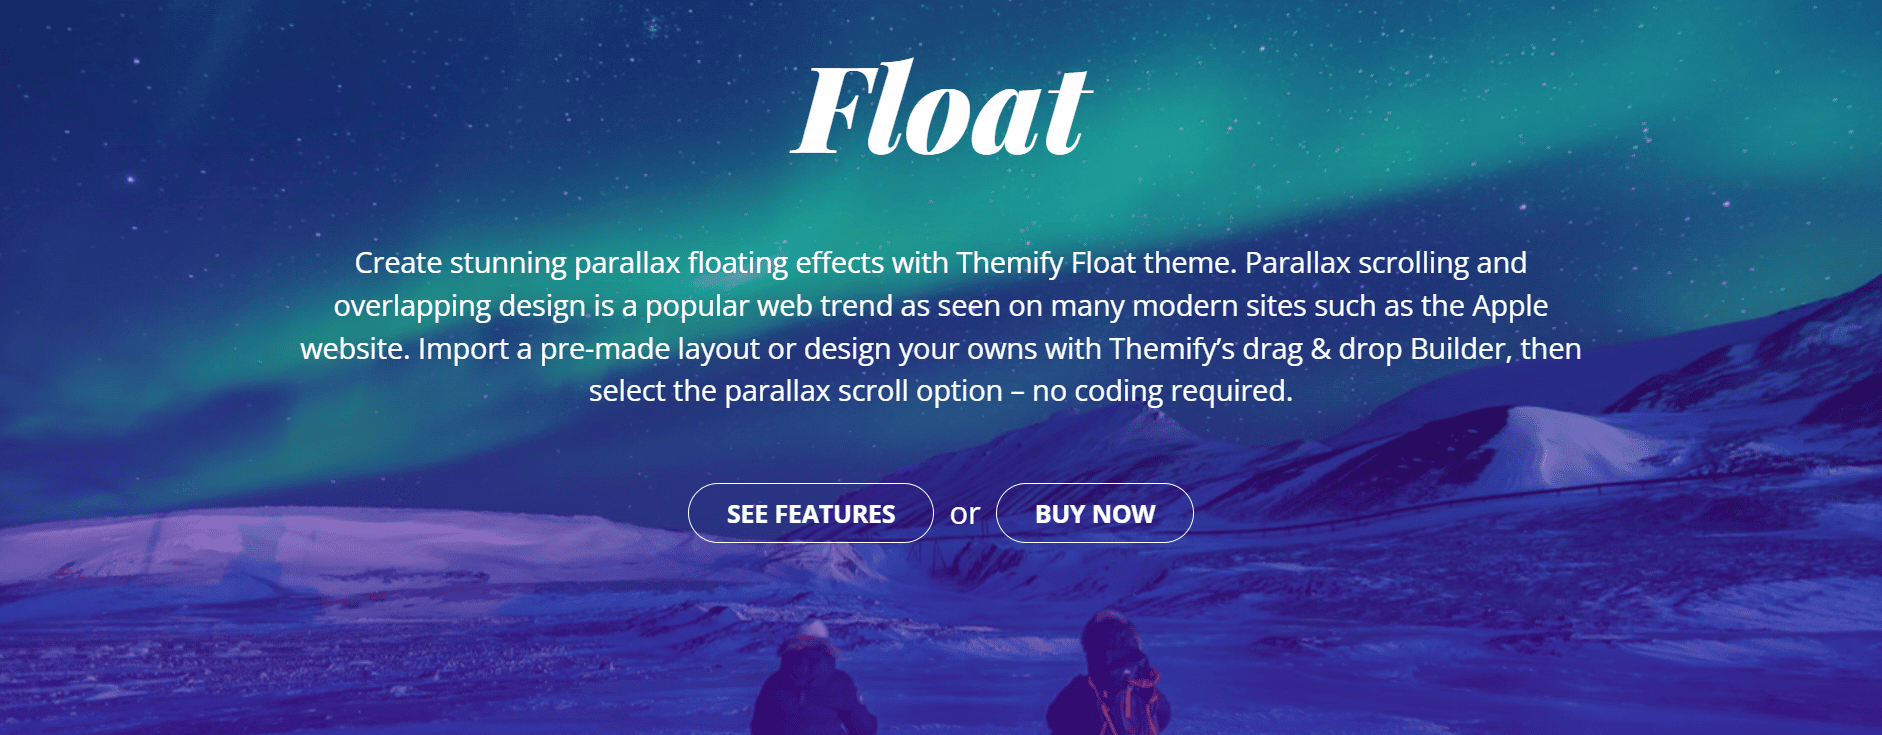 Screenshot of the website for the Float WordPress theme for affiliates.